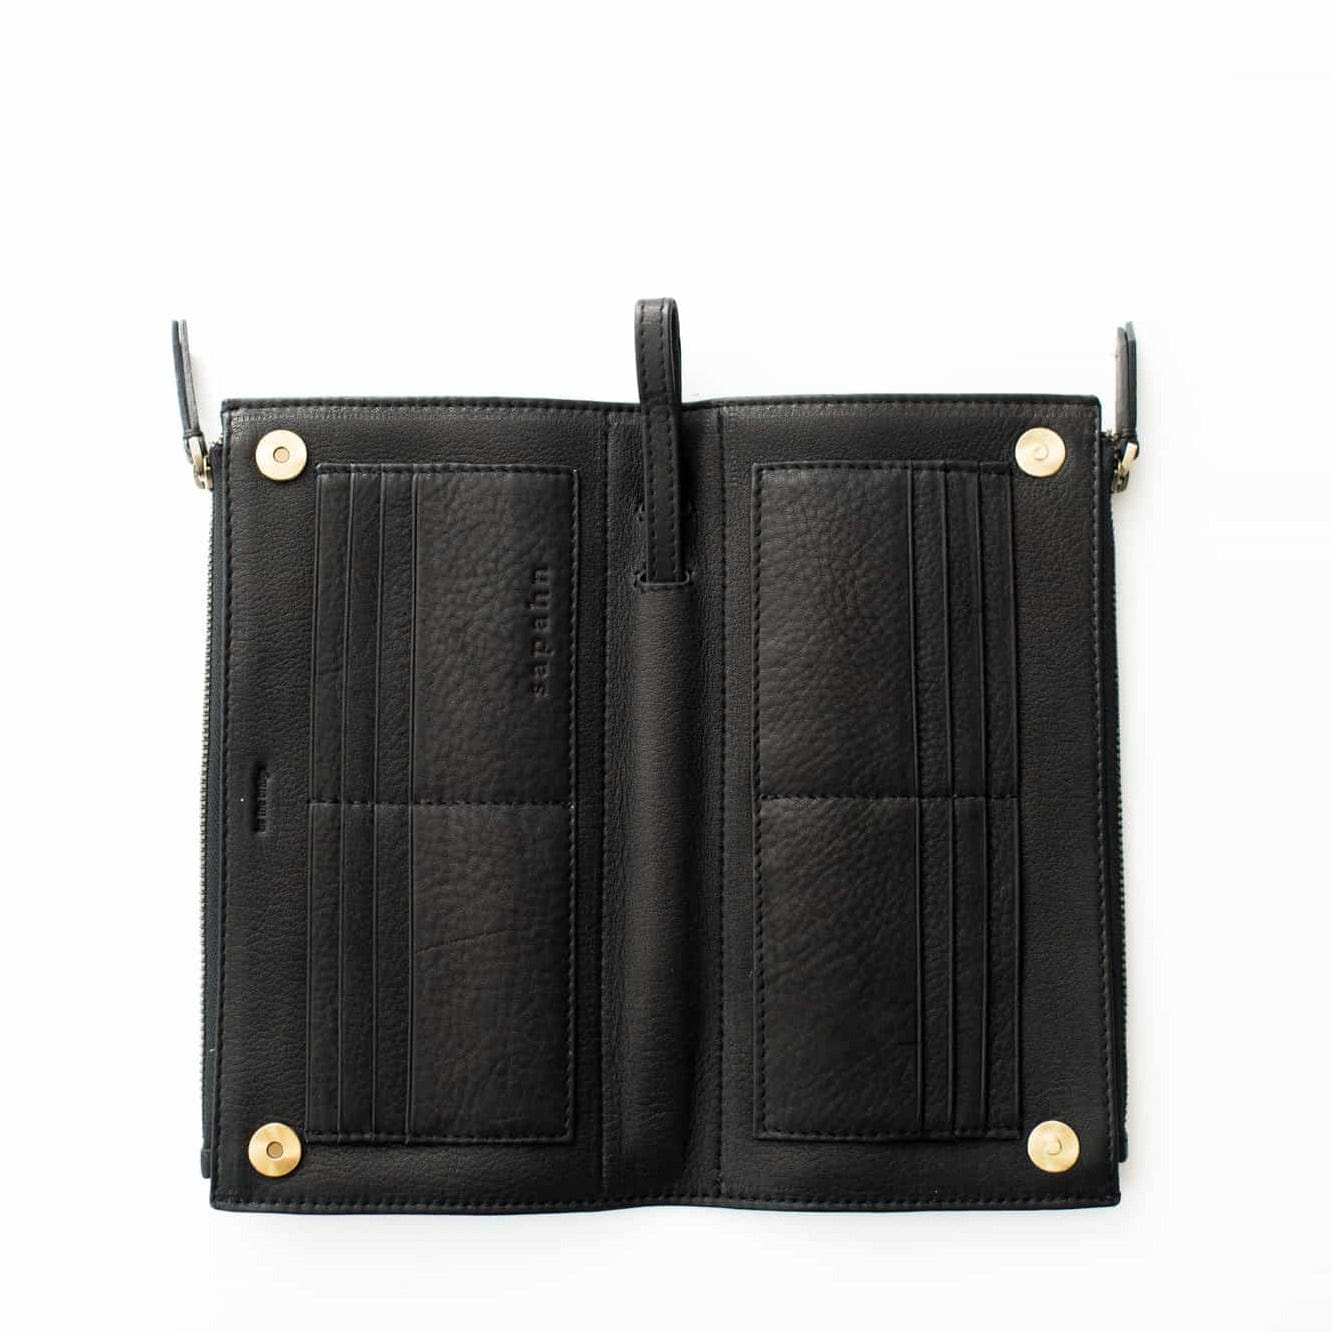 Parker Small Leather Zip Card Case